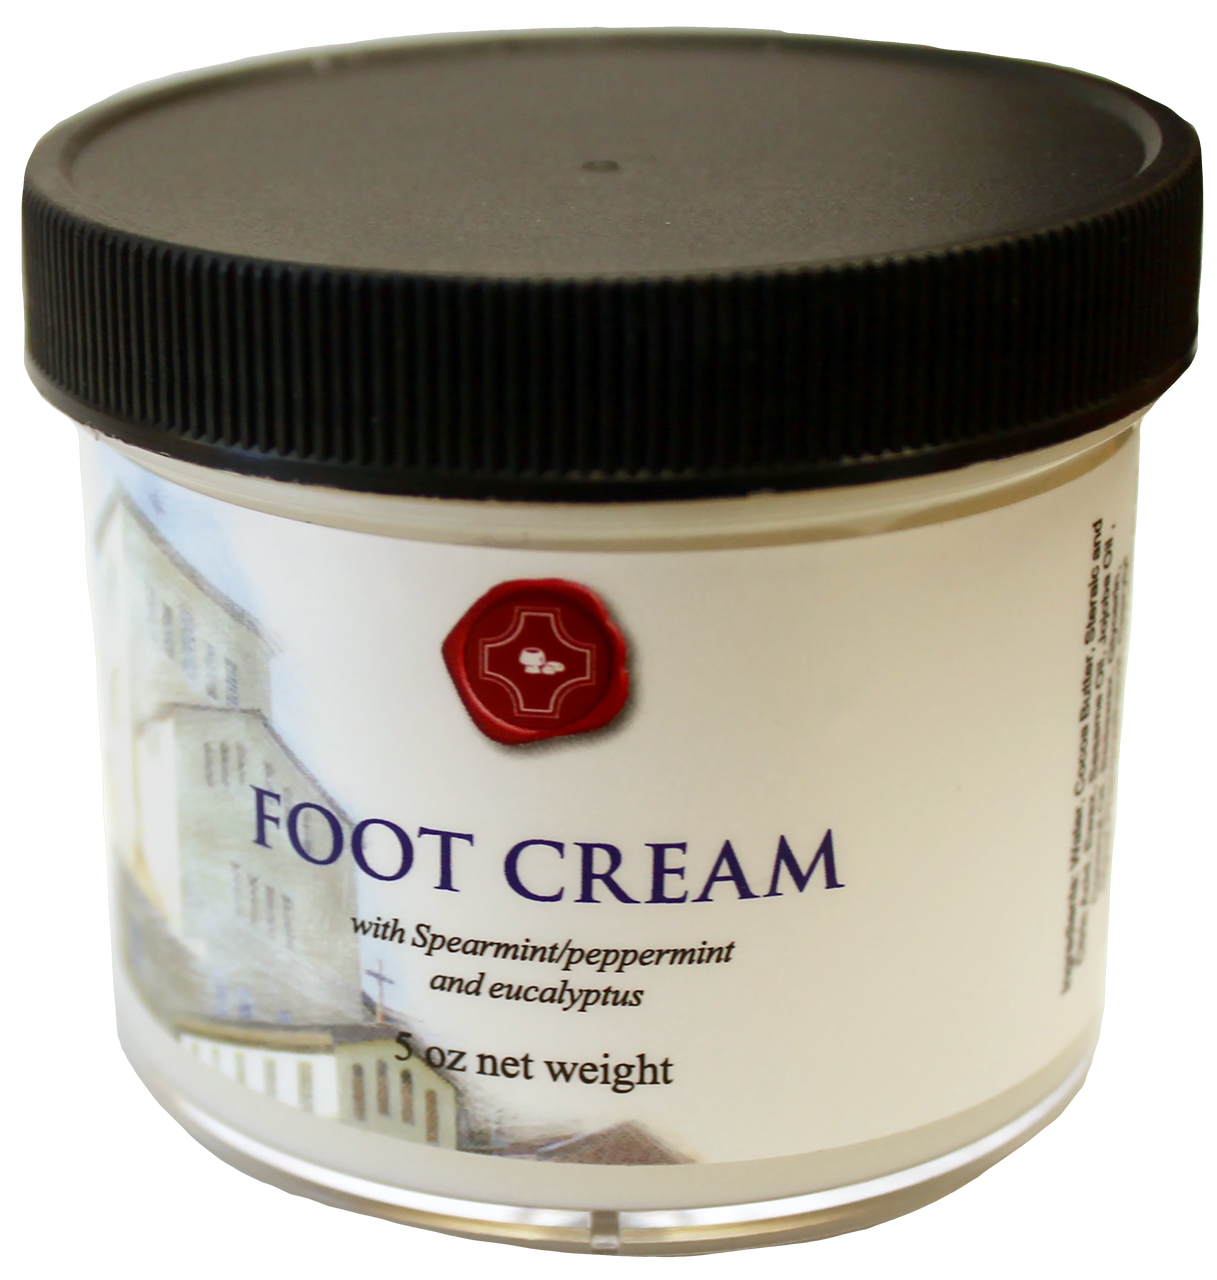 Foot Cream with Spearmint/Peppermint and Eucalyptus